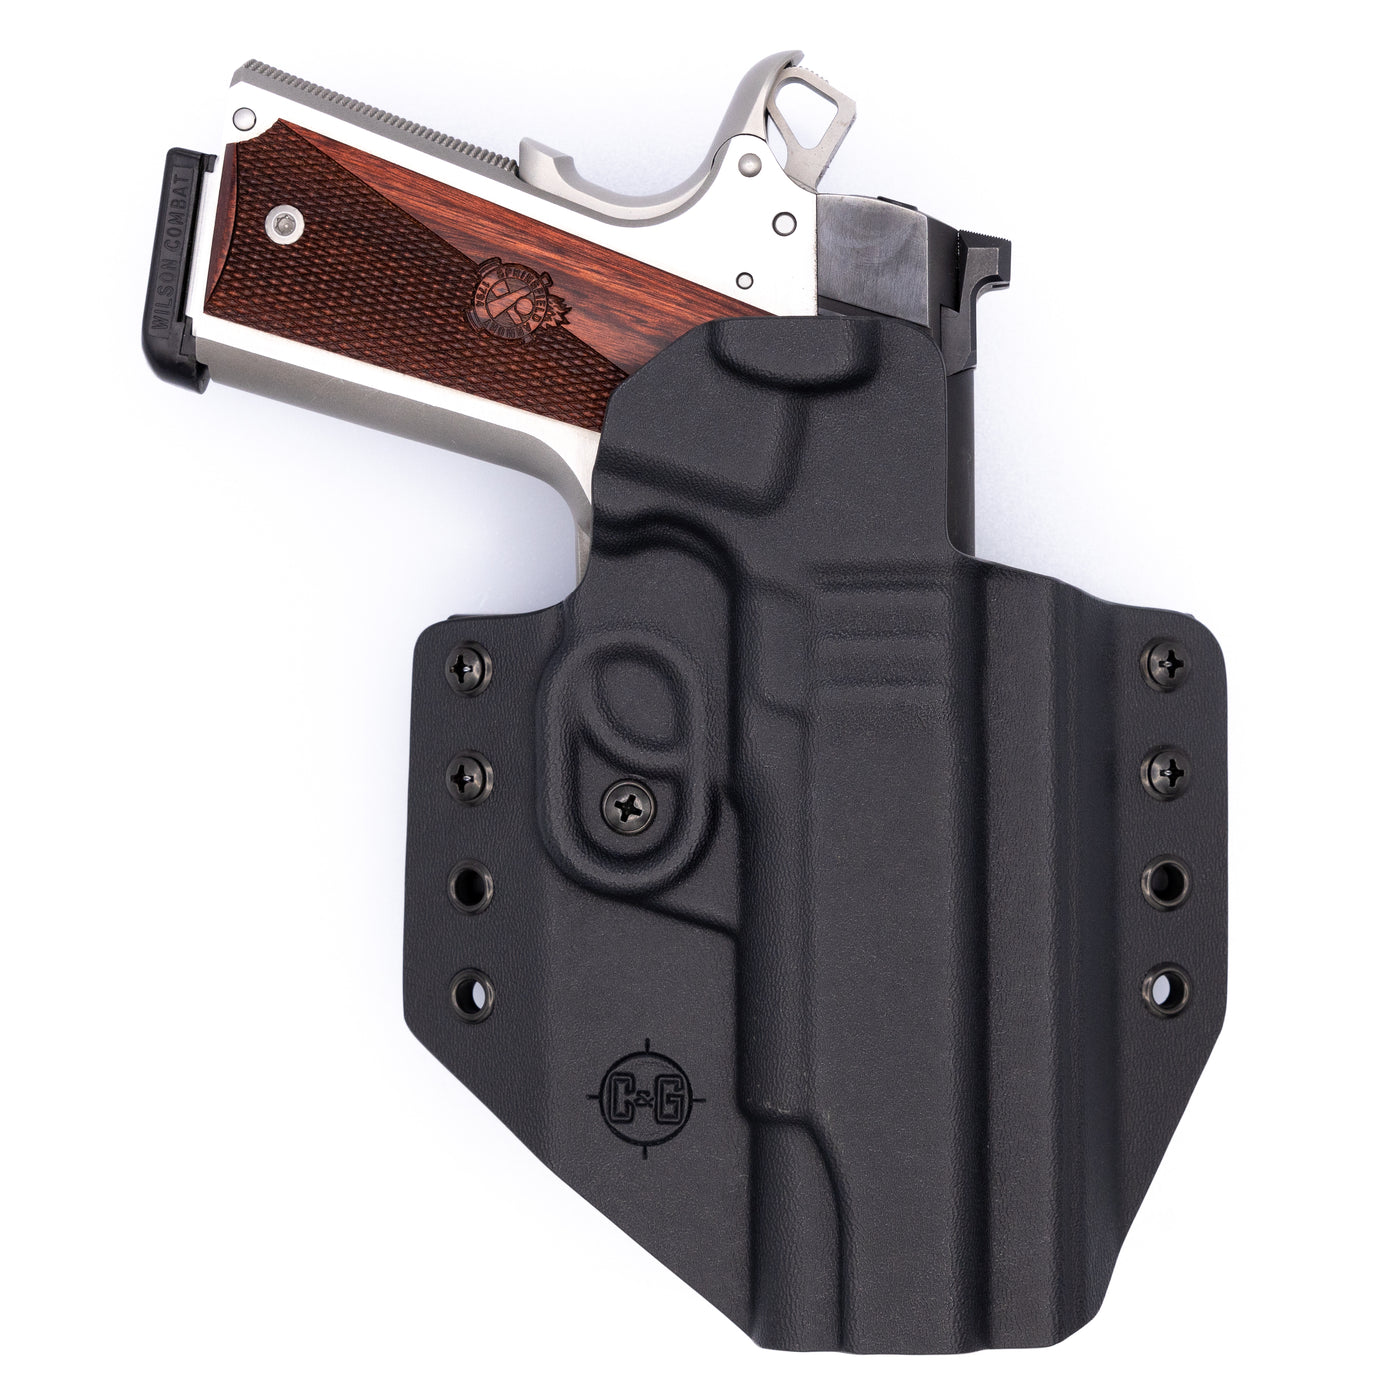 C&G Holsters quick ship Covert OWB kydex holster for 1911 5in (Govt) made for Springfield Ronin